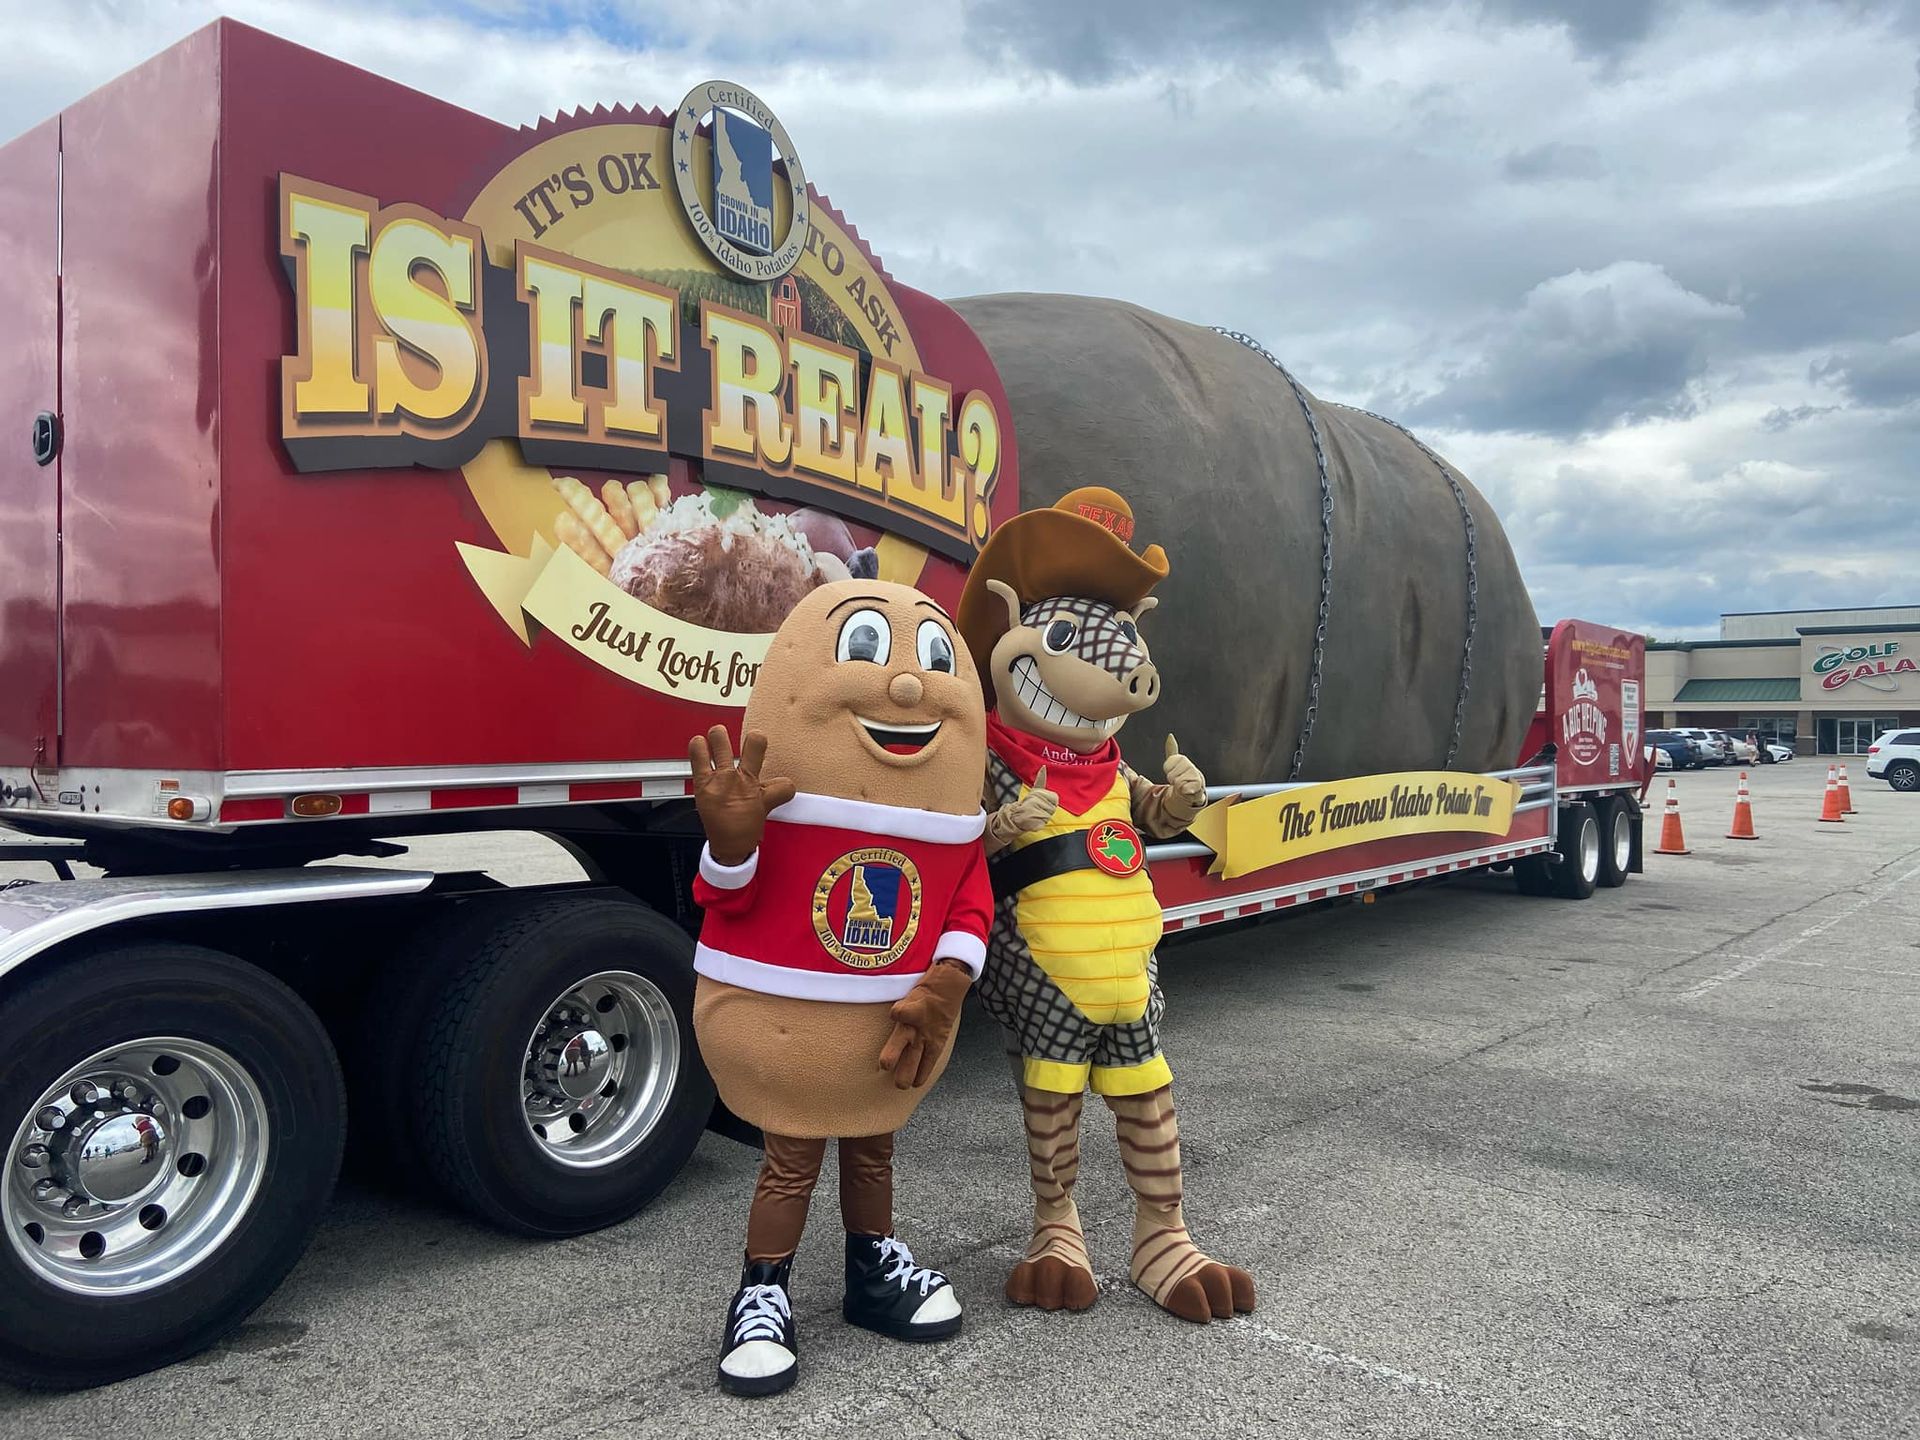 World's Largest Traveling Potato Sculpture, world record from Idaho
